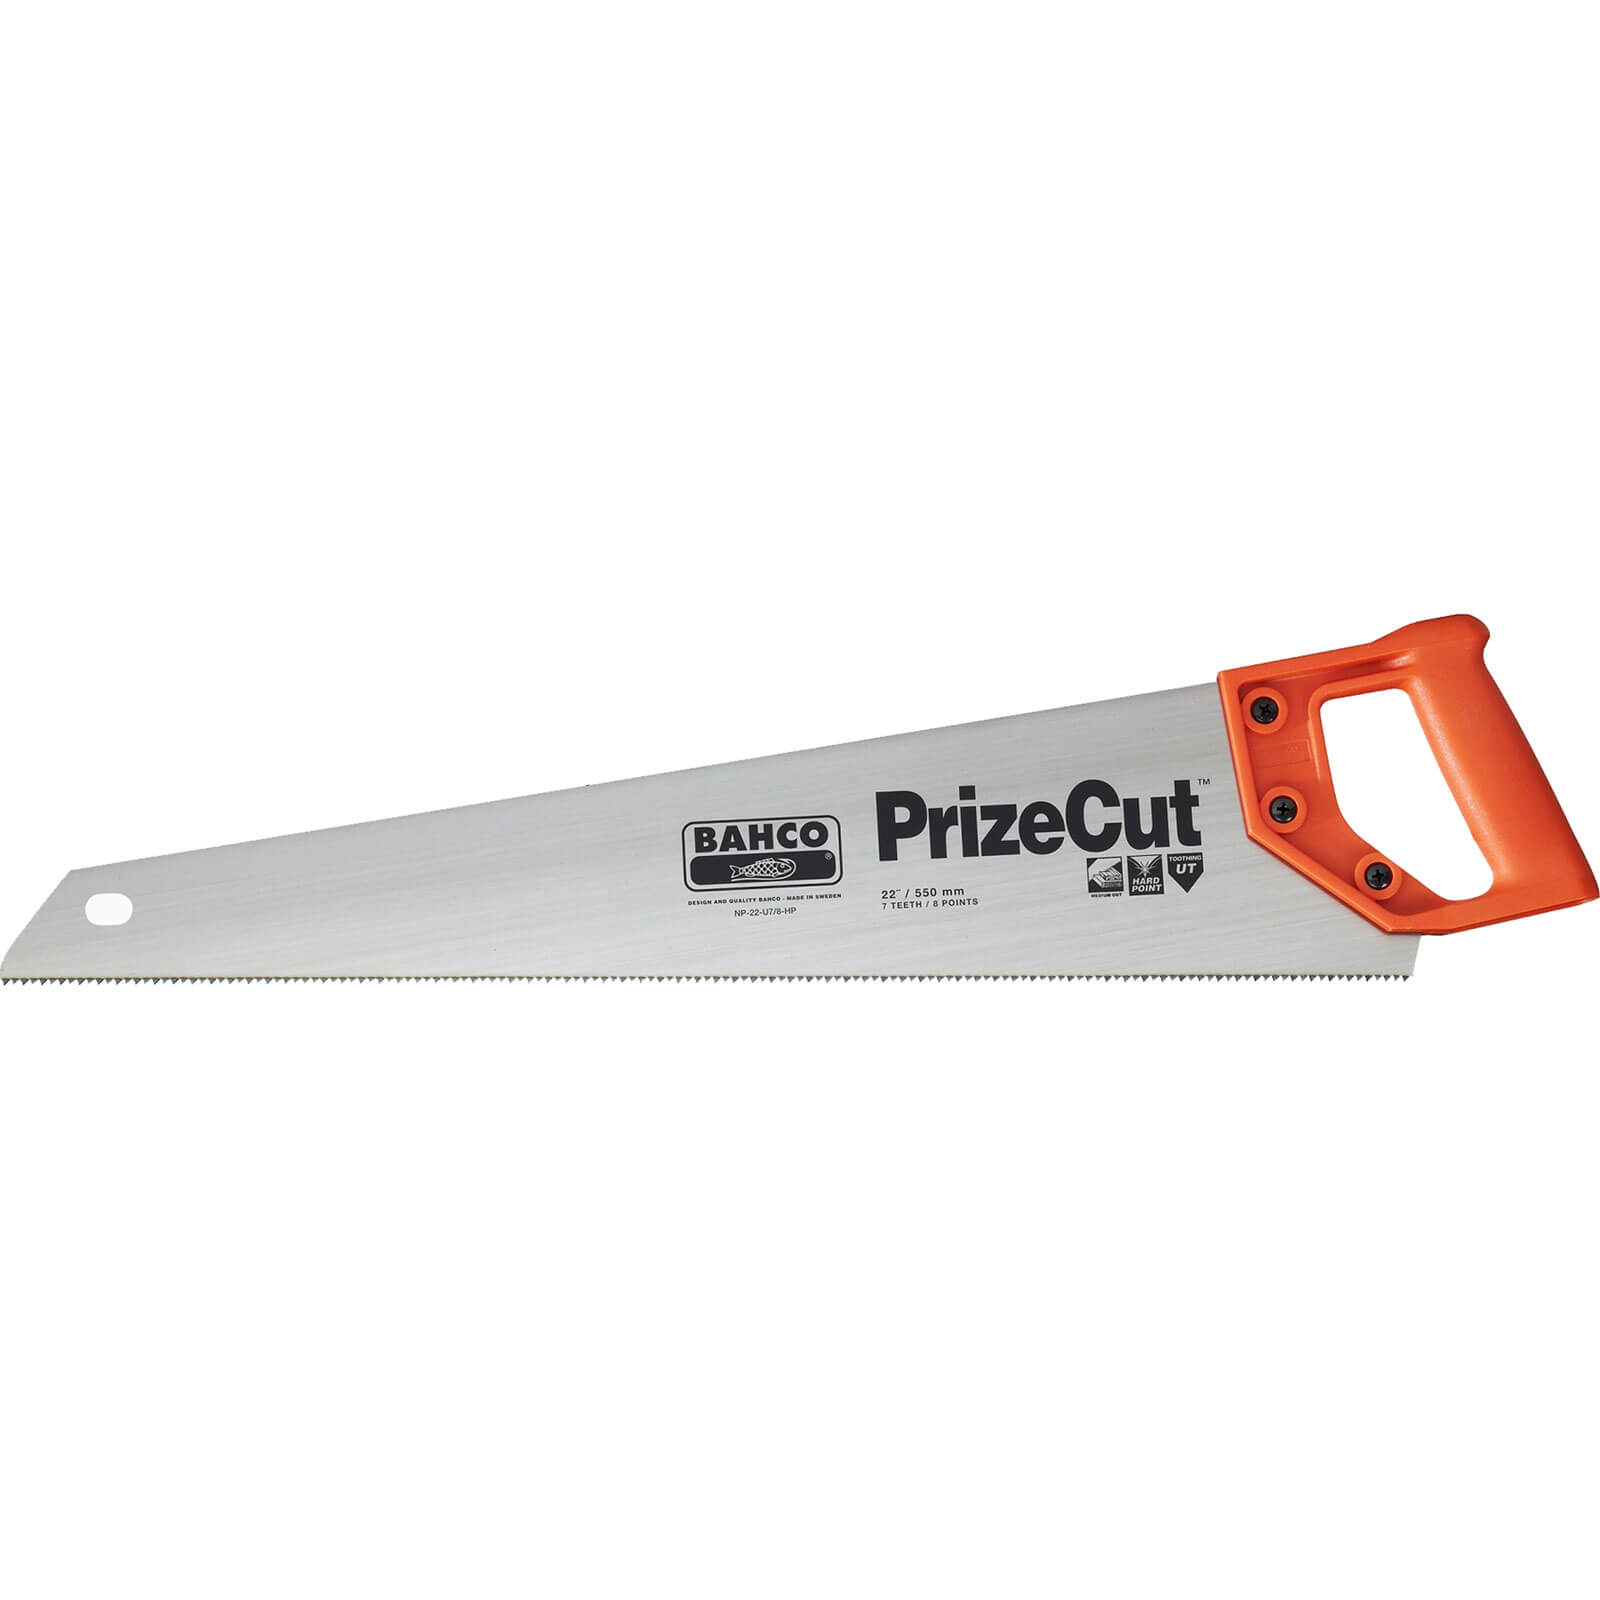 Image of Bahco PrizeCut Hand Saw 22" / 550mm 7tpi